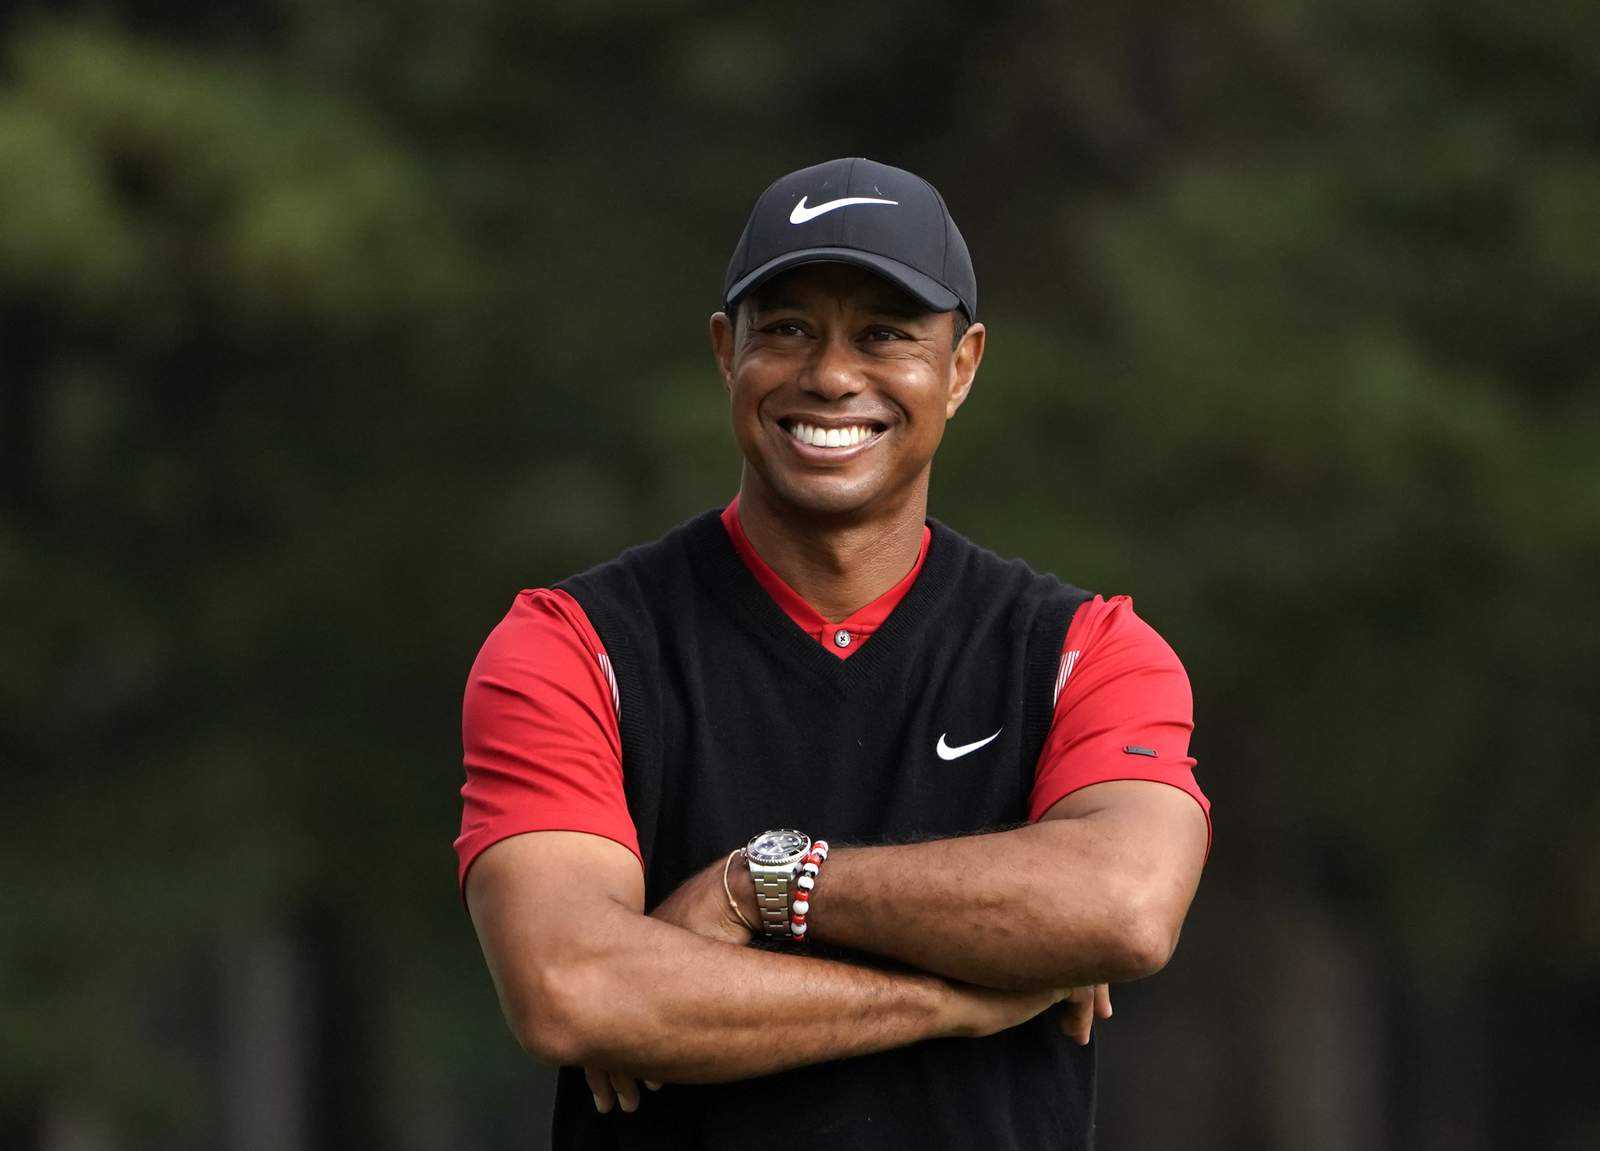  Tiger Woods Suffers Two Broken Legs in Single Car Accident